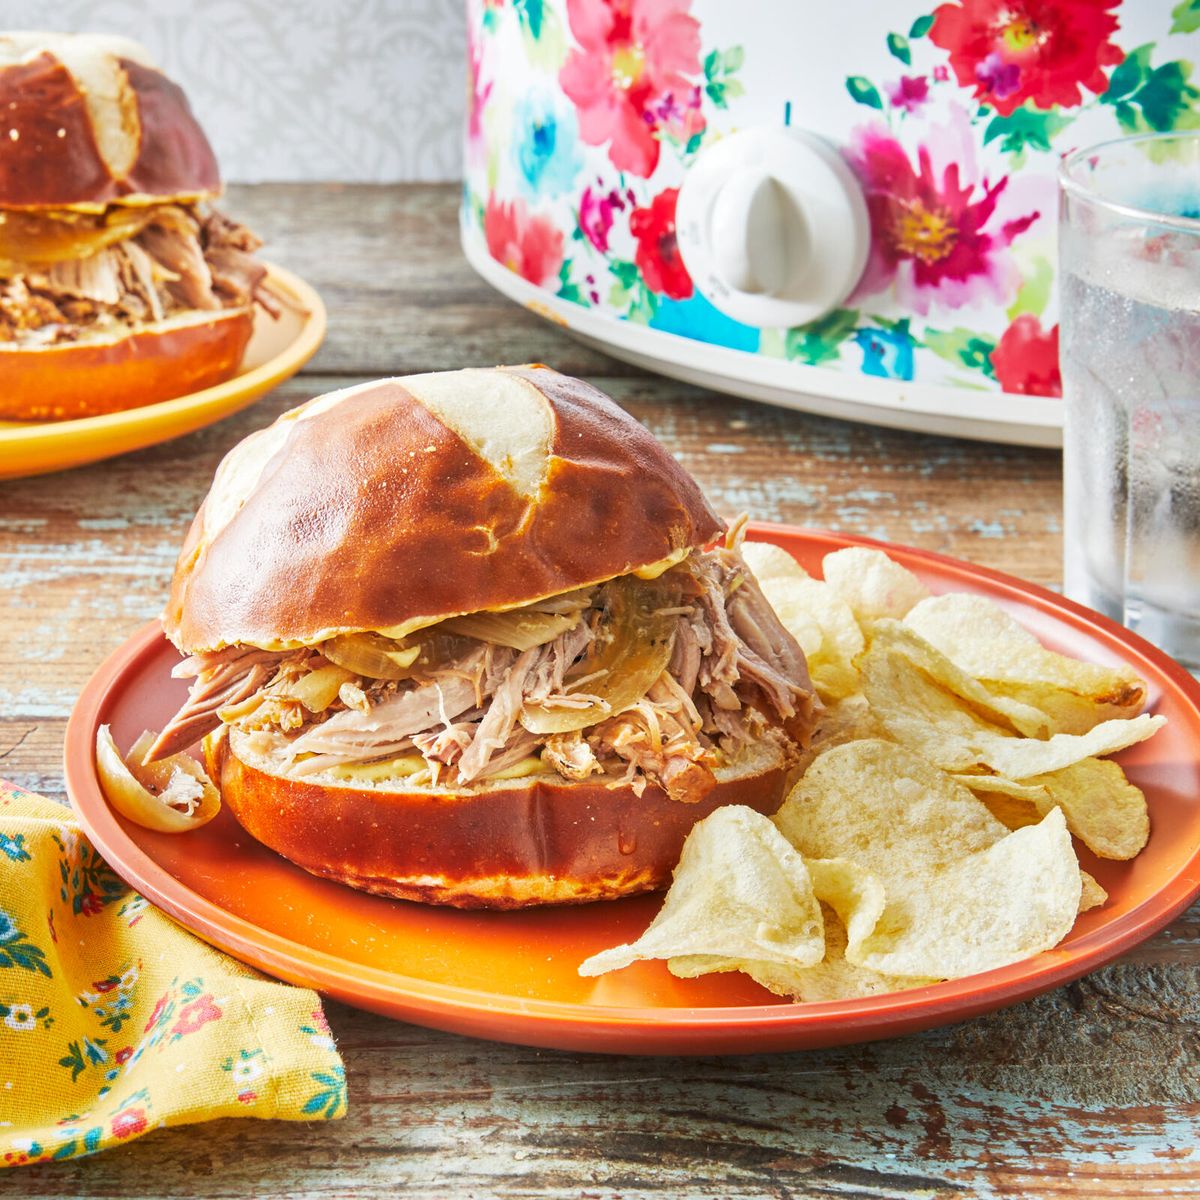 the pioneer woman's slow cooker pulled pork recipe